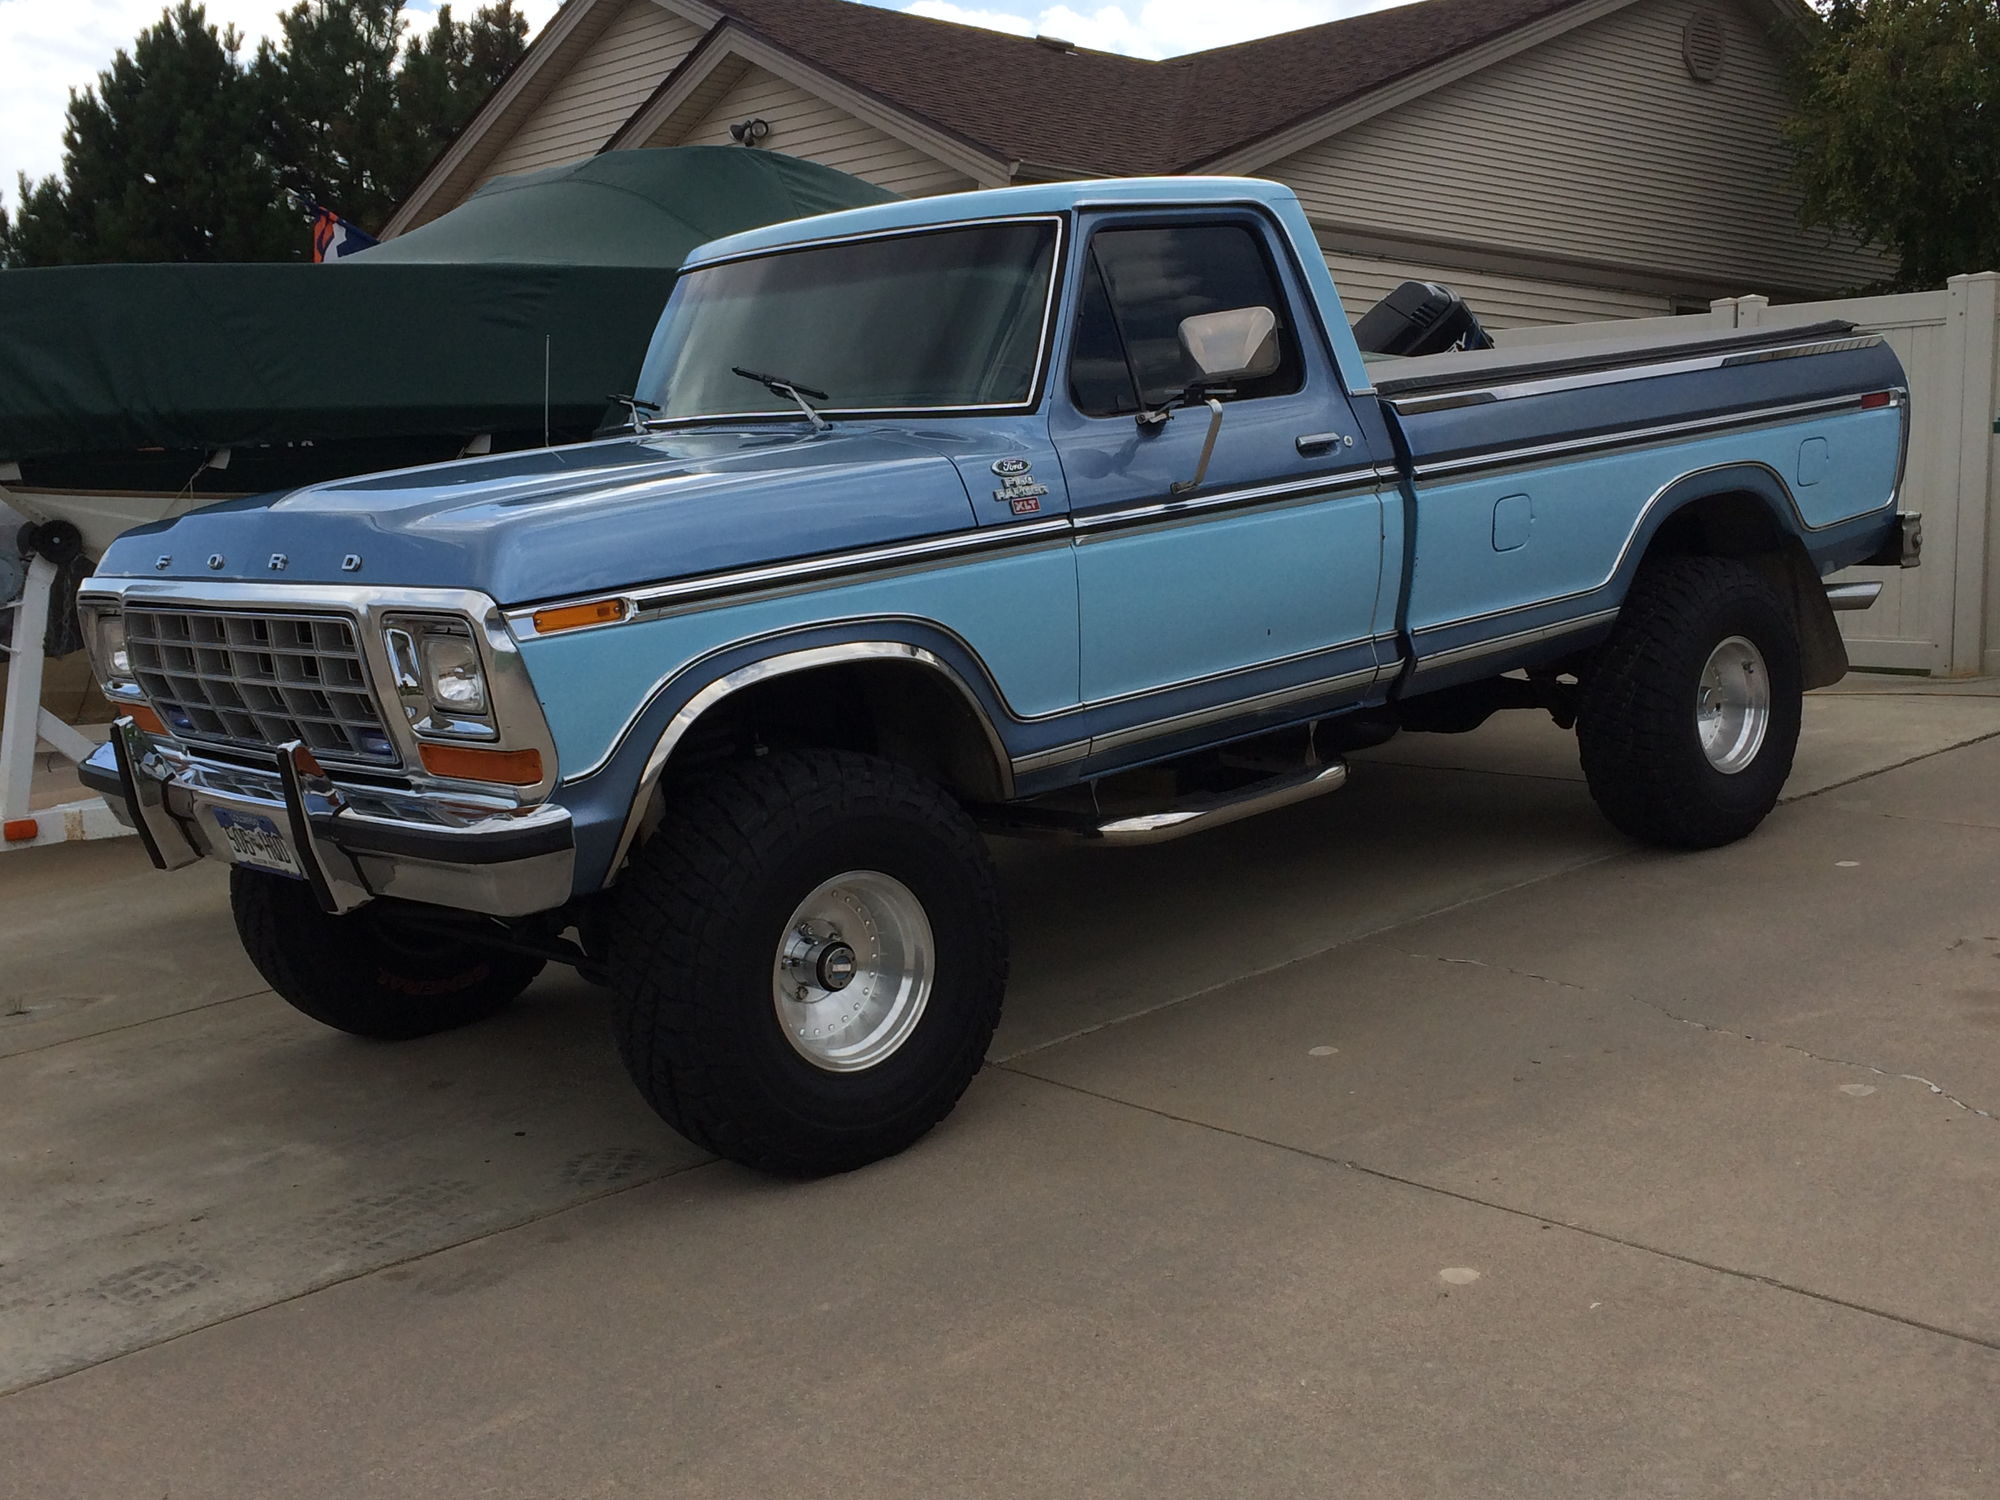 1979 Ford F 150 for sale  Ford Truck Enthusiasts Forums